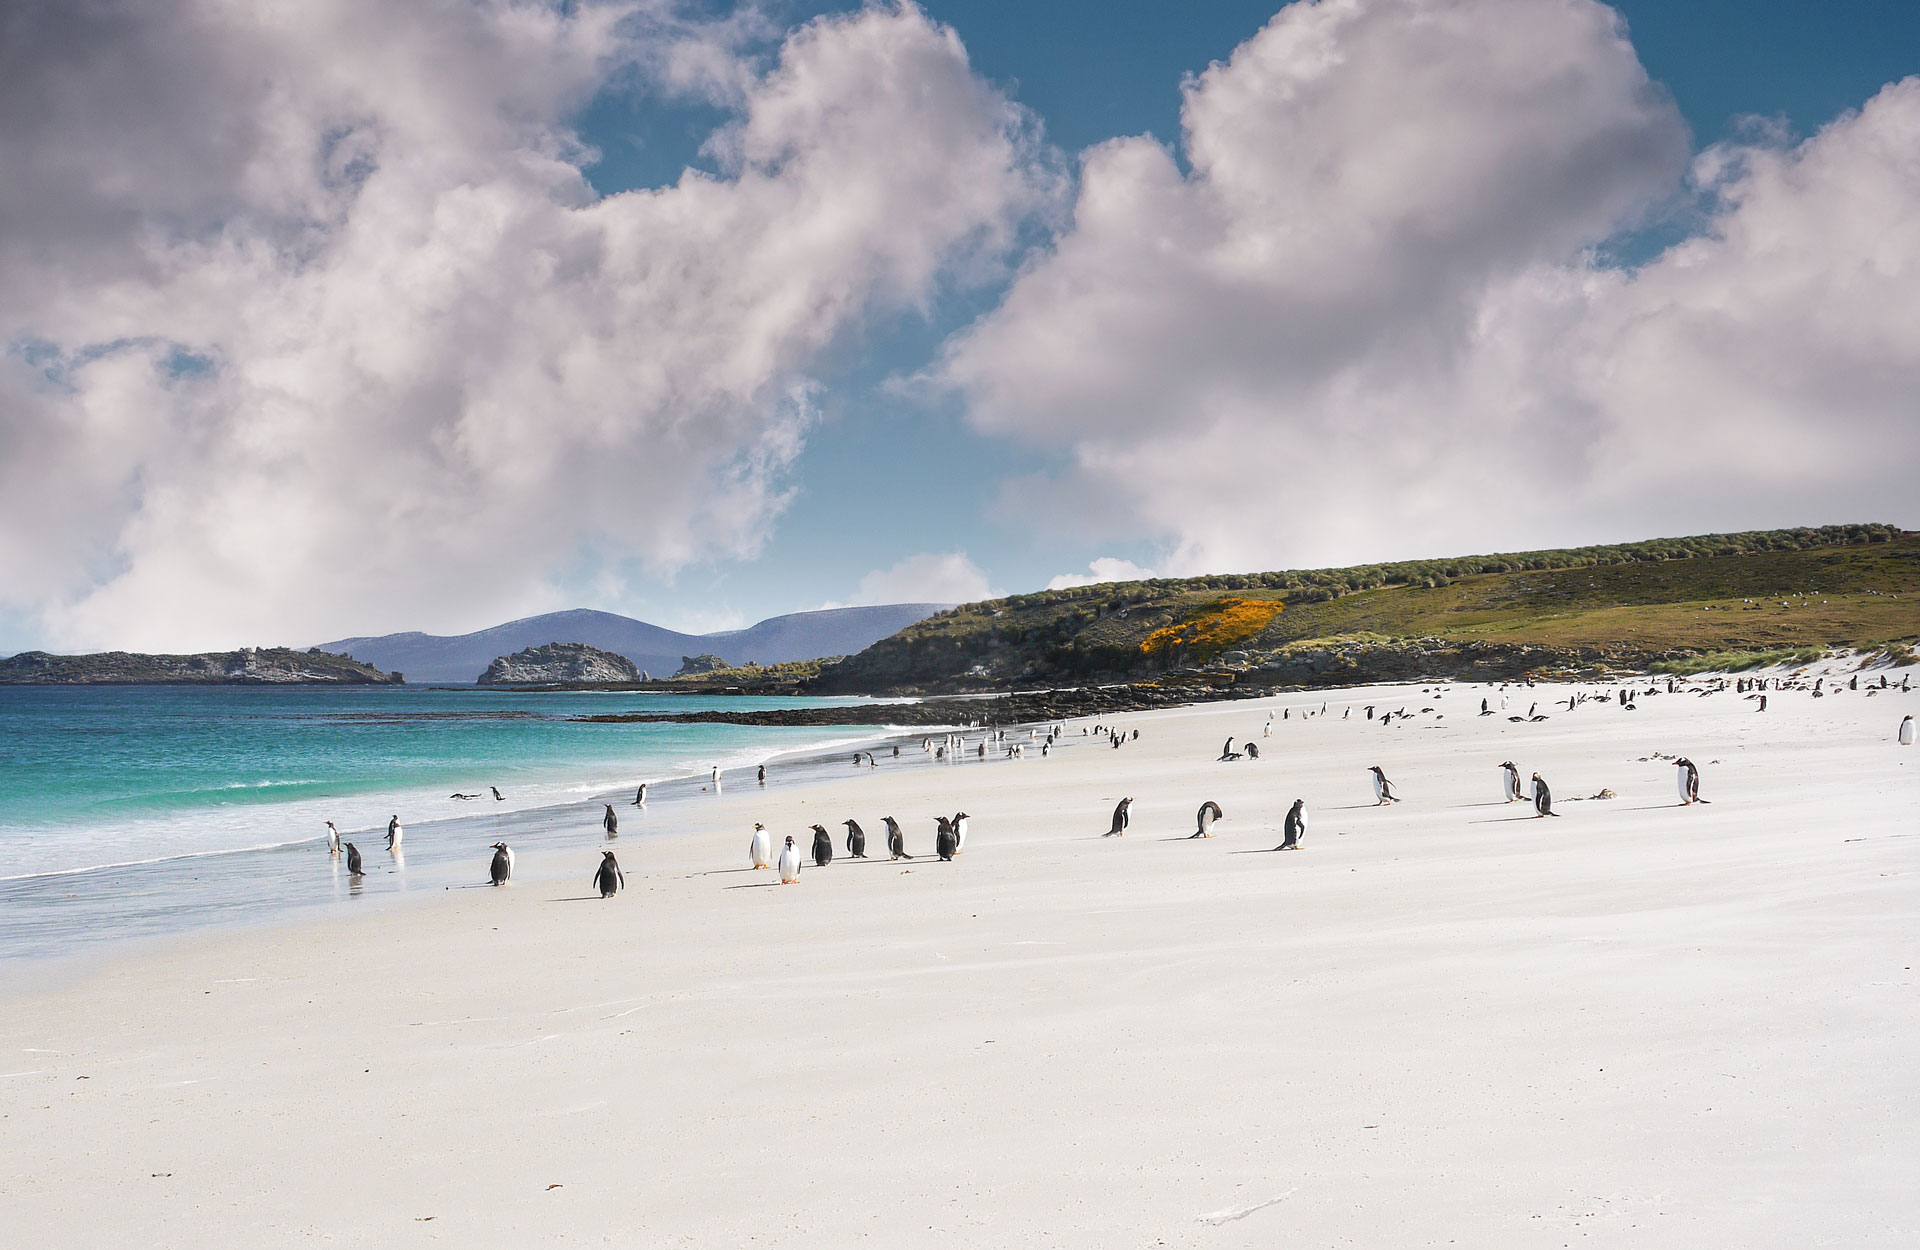 Gentoo penguins on a beach in the falkland islands